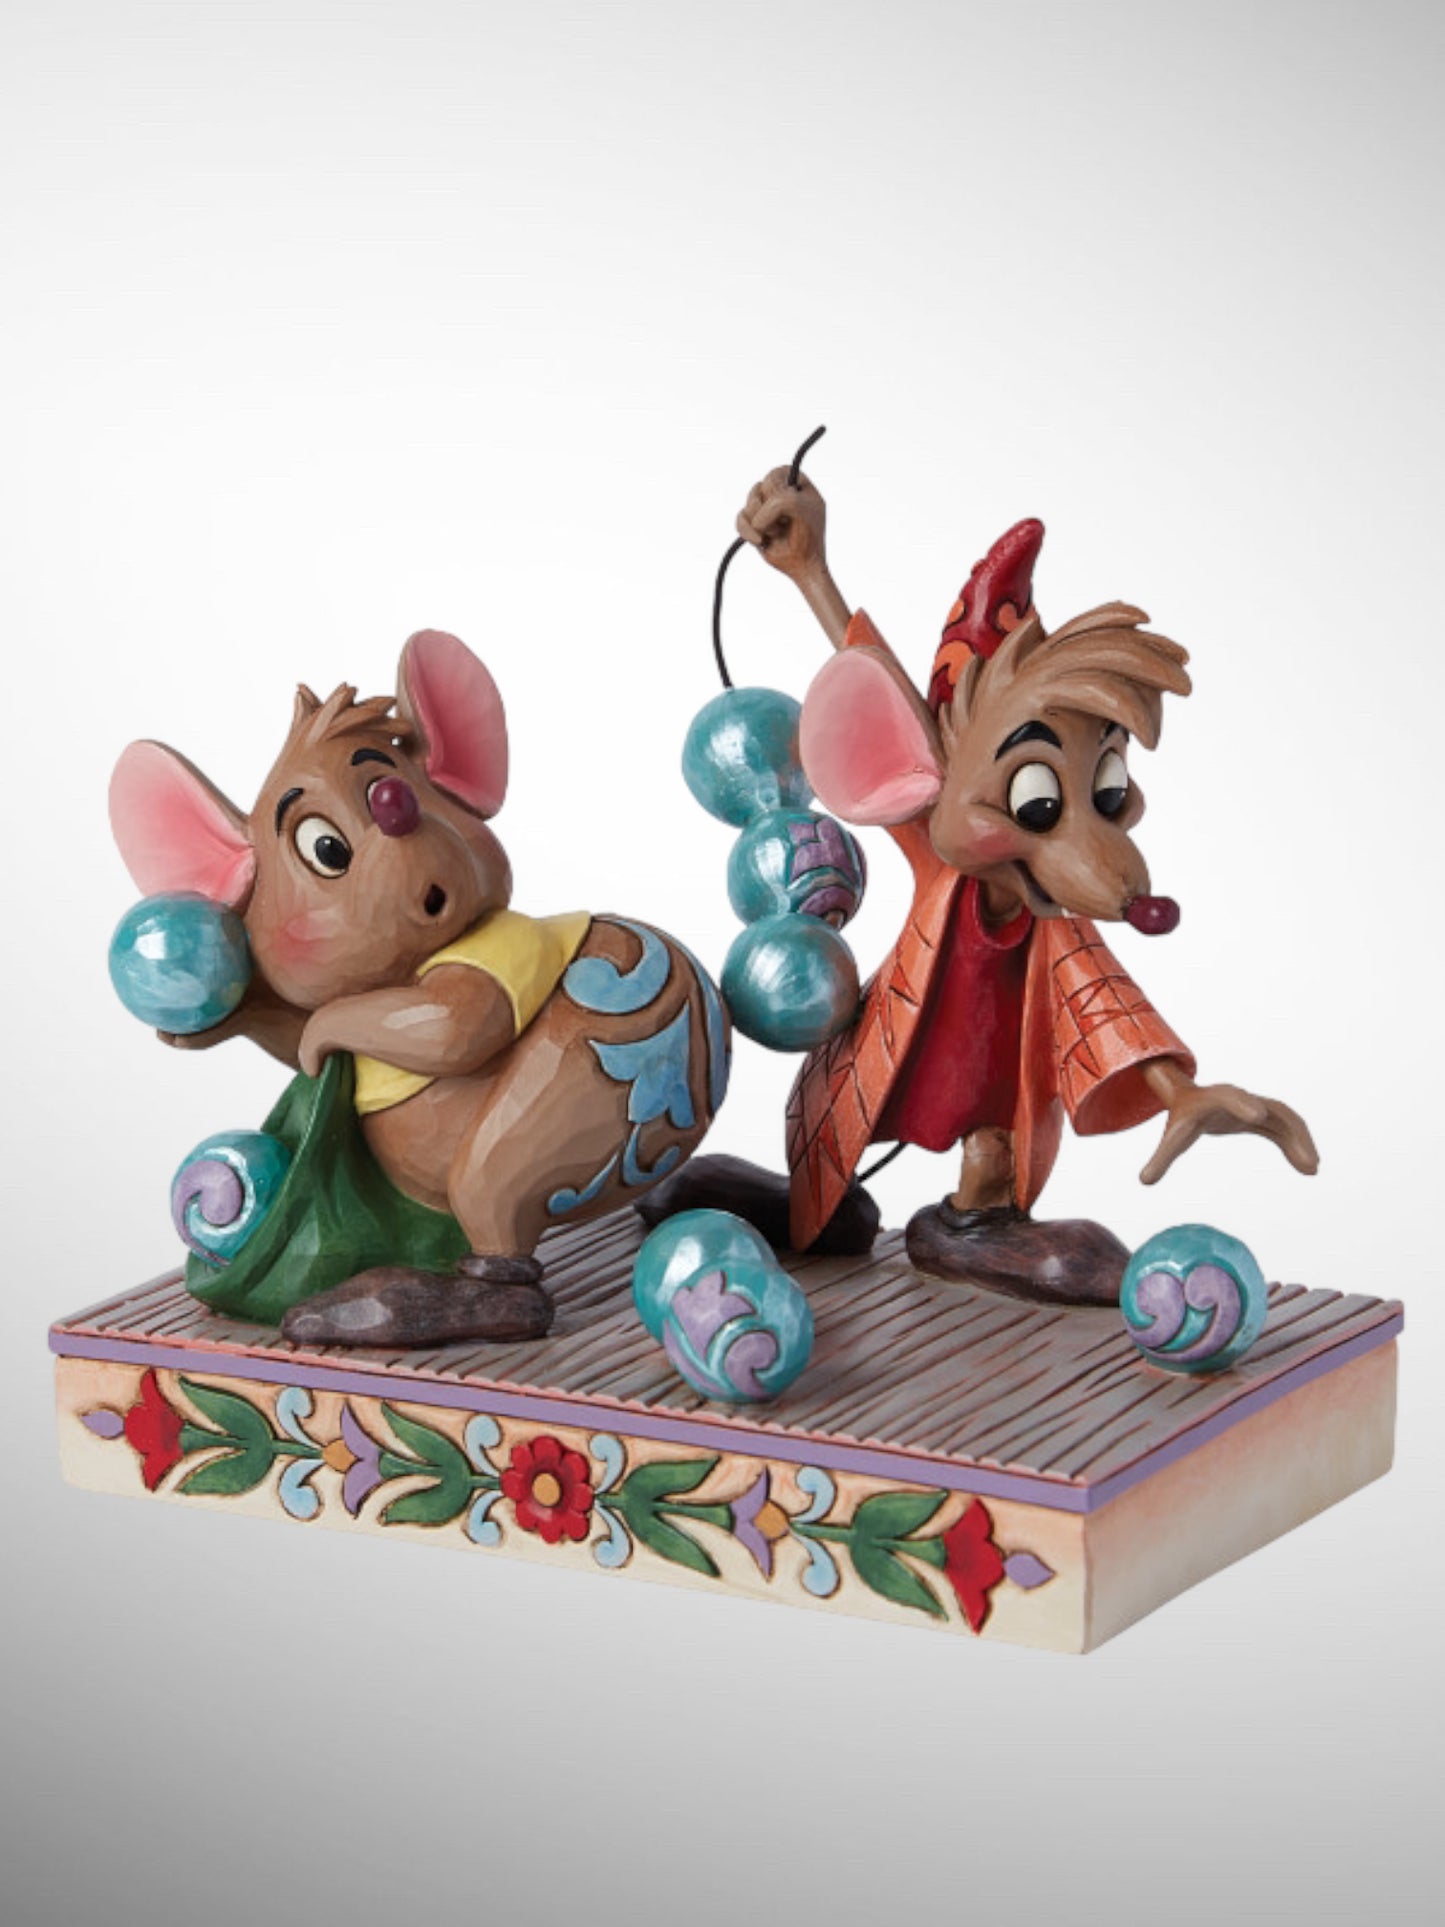 Jim Shore Disney Traditions - Beads for Cinderelly Gus and Jaq Cinderella Figurine - PREORDER